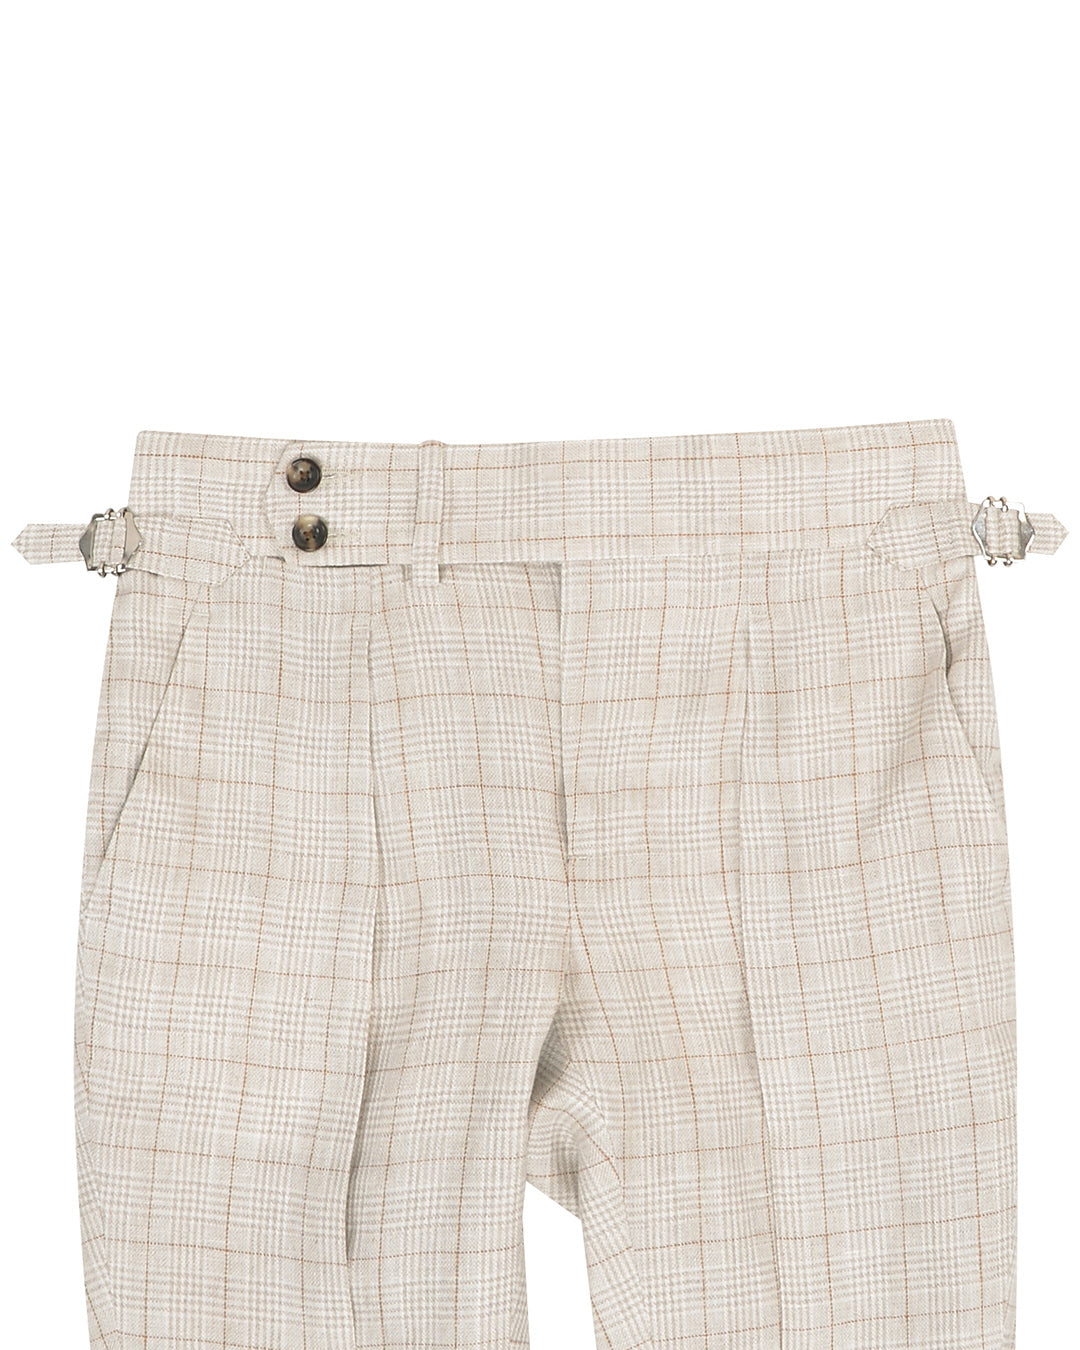 Front view of custom linen pants for men by Luxire in light tan plaid